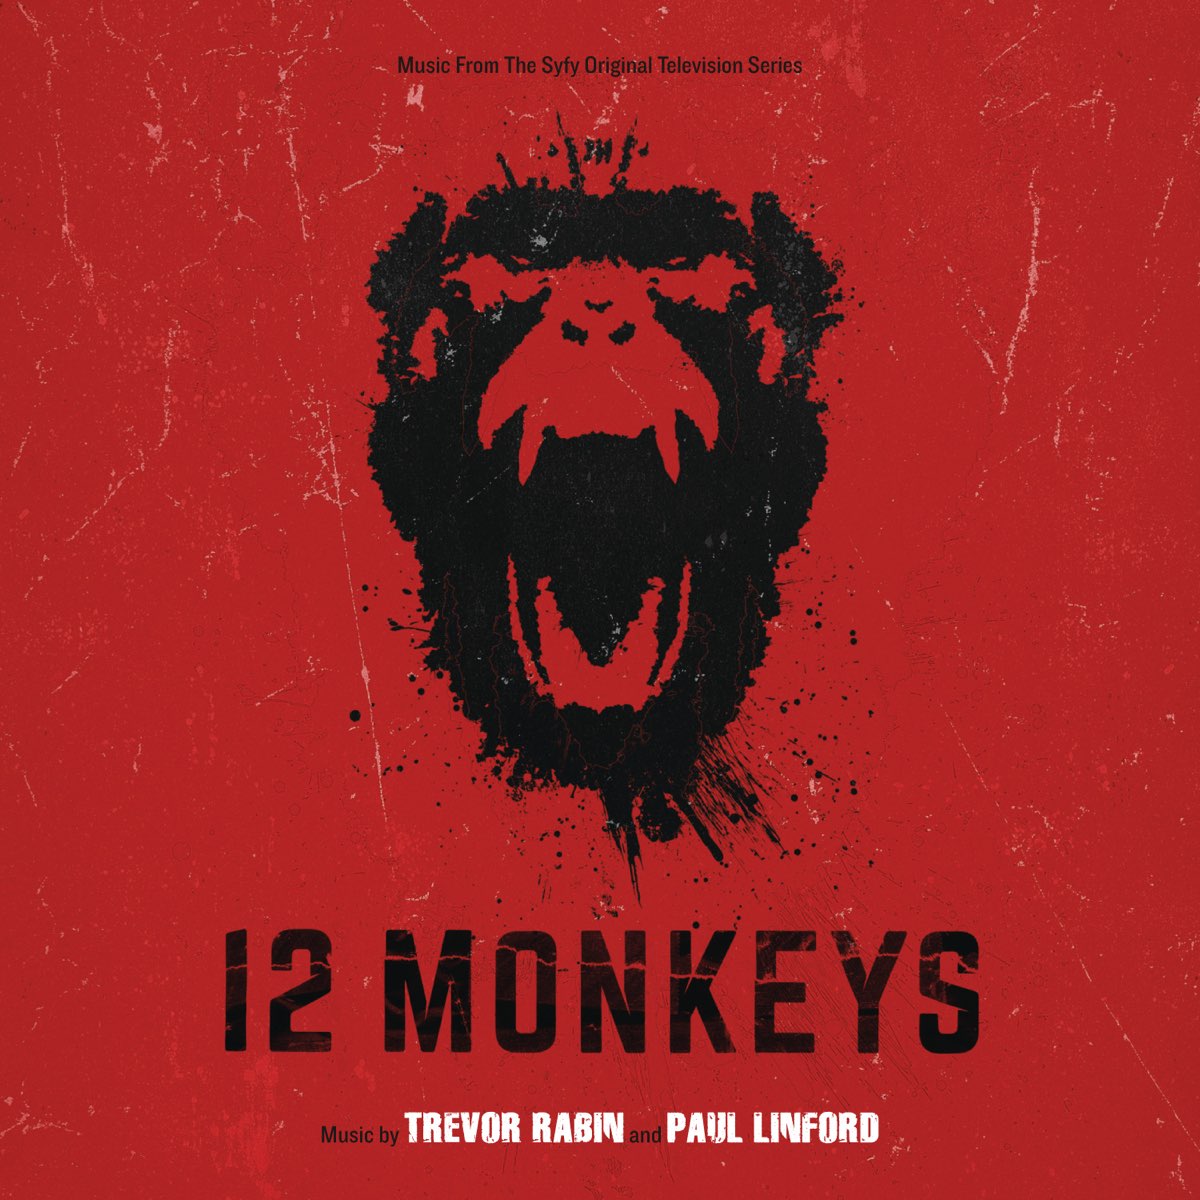 12 Monkeys (Music From The Syfy Original Television Series)